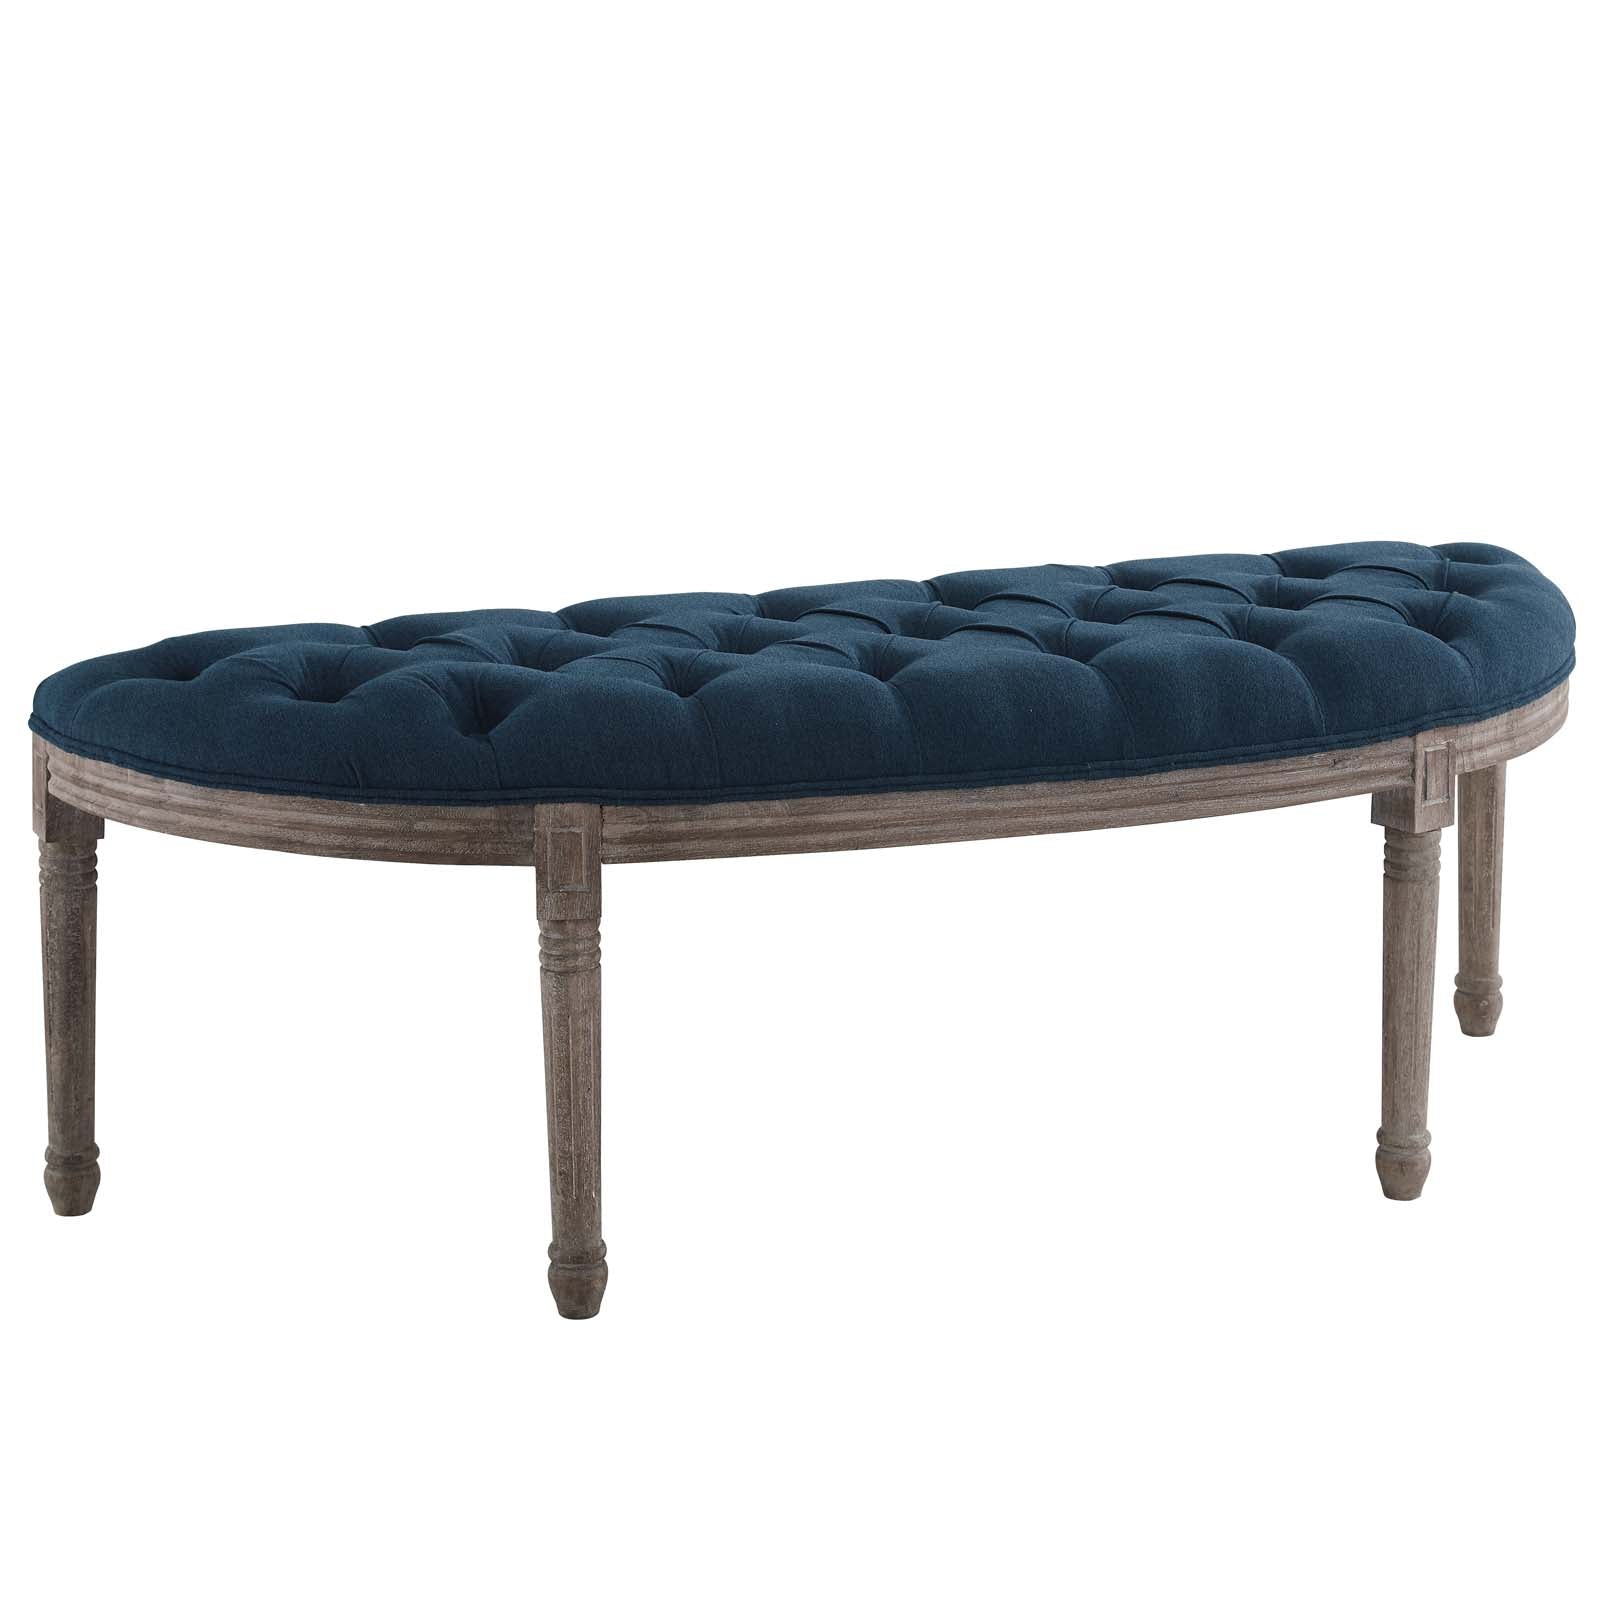 Esteem Vintage French Upholstered Fabric Semi-Circle Bench